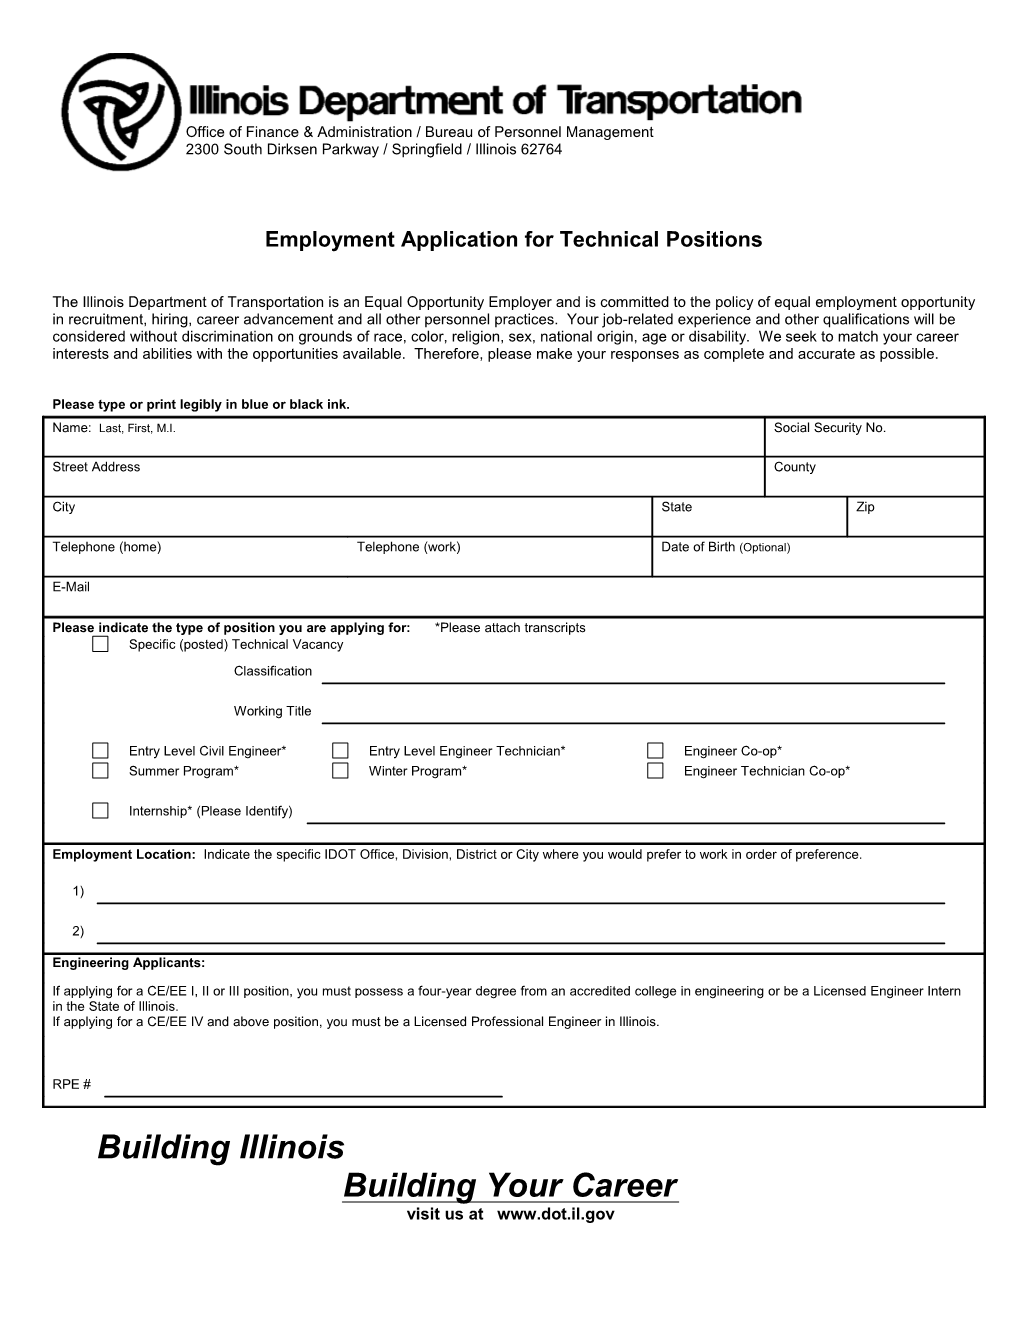 Employment Application for Technical Positions